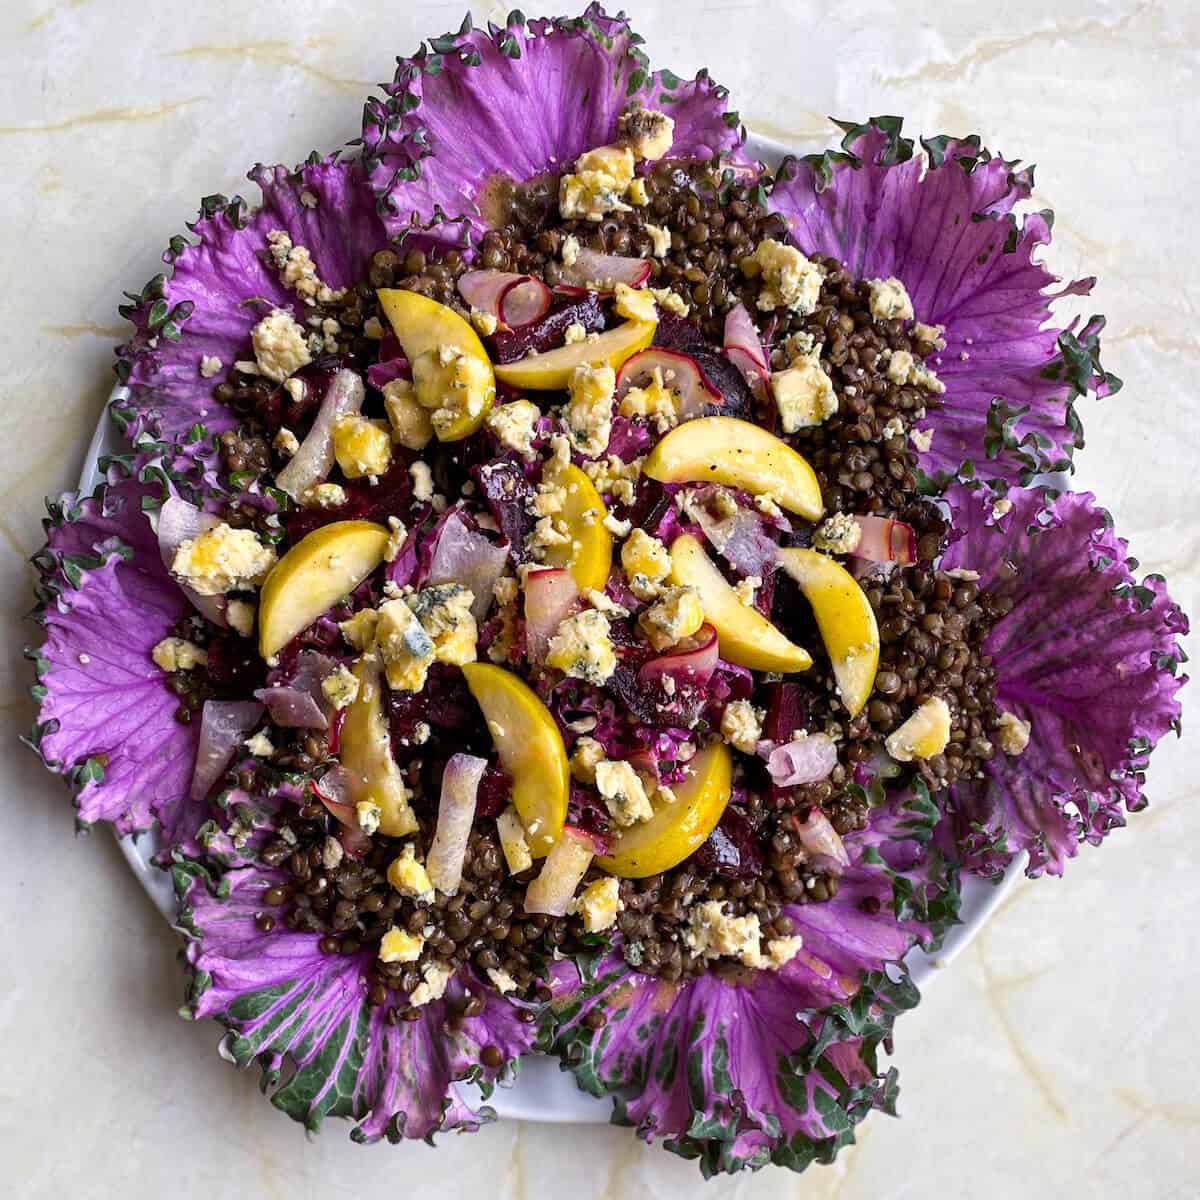 Purple Kale Salad With Lentils, Apple, Roasted Beets & Blue Cheese